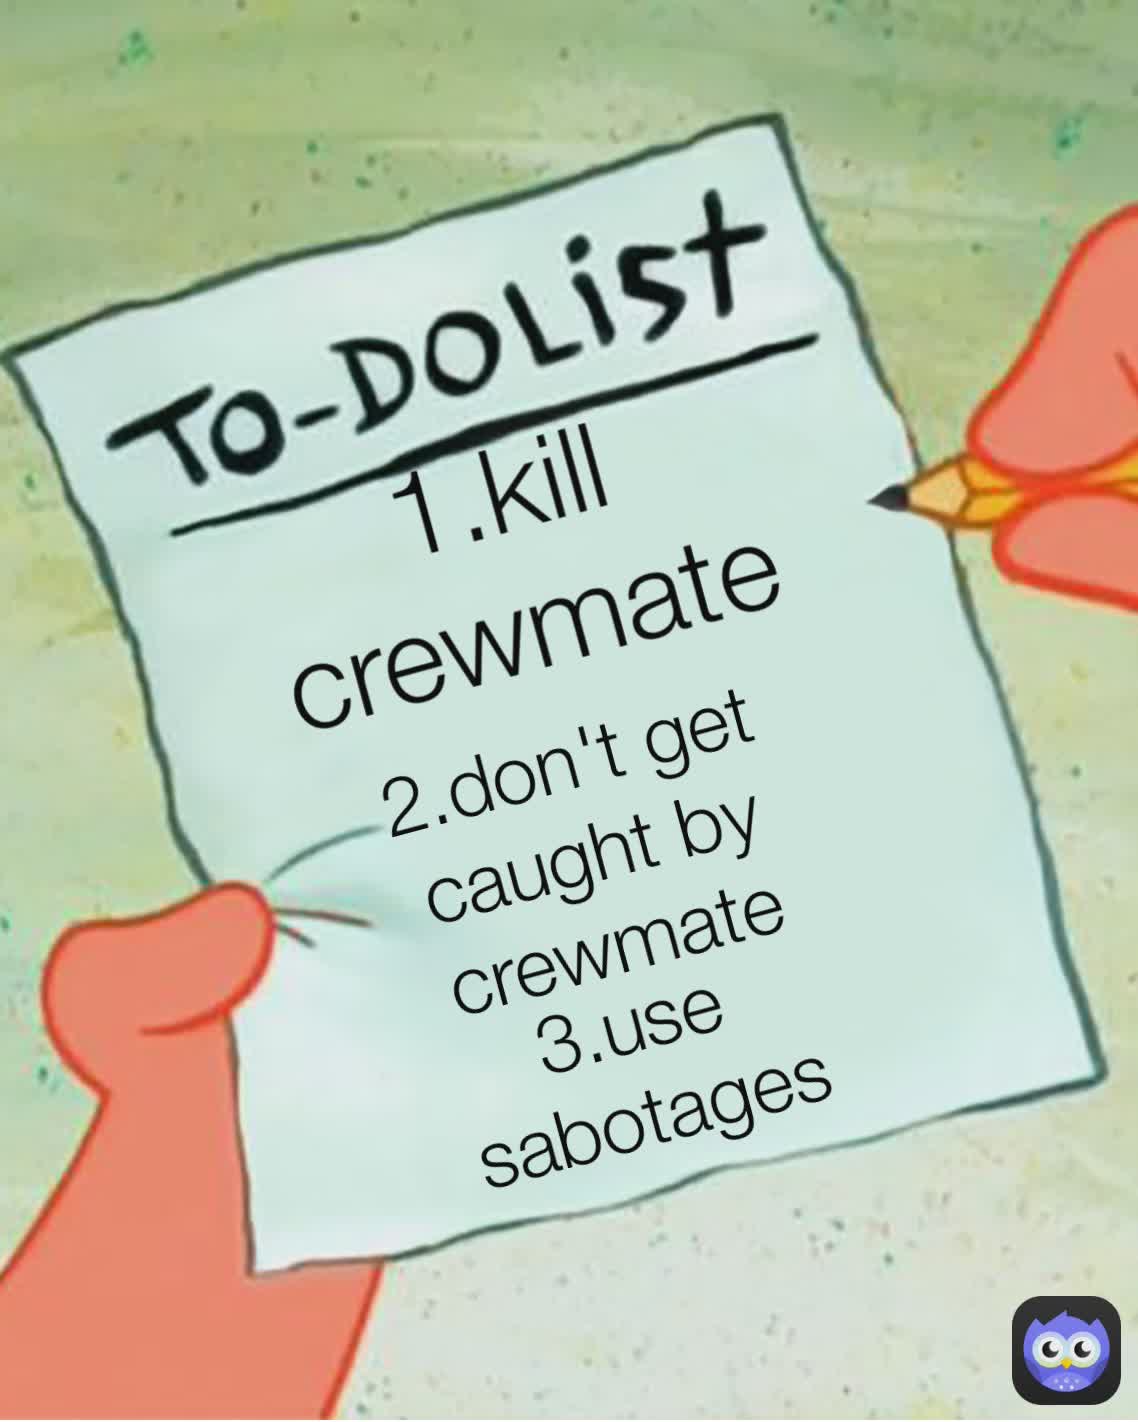 2.don't get caught by crewmate 1.kill crewmate 3.use sabotages